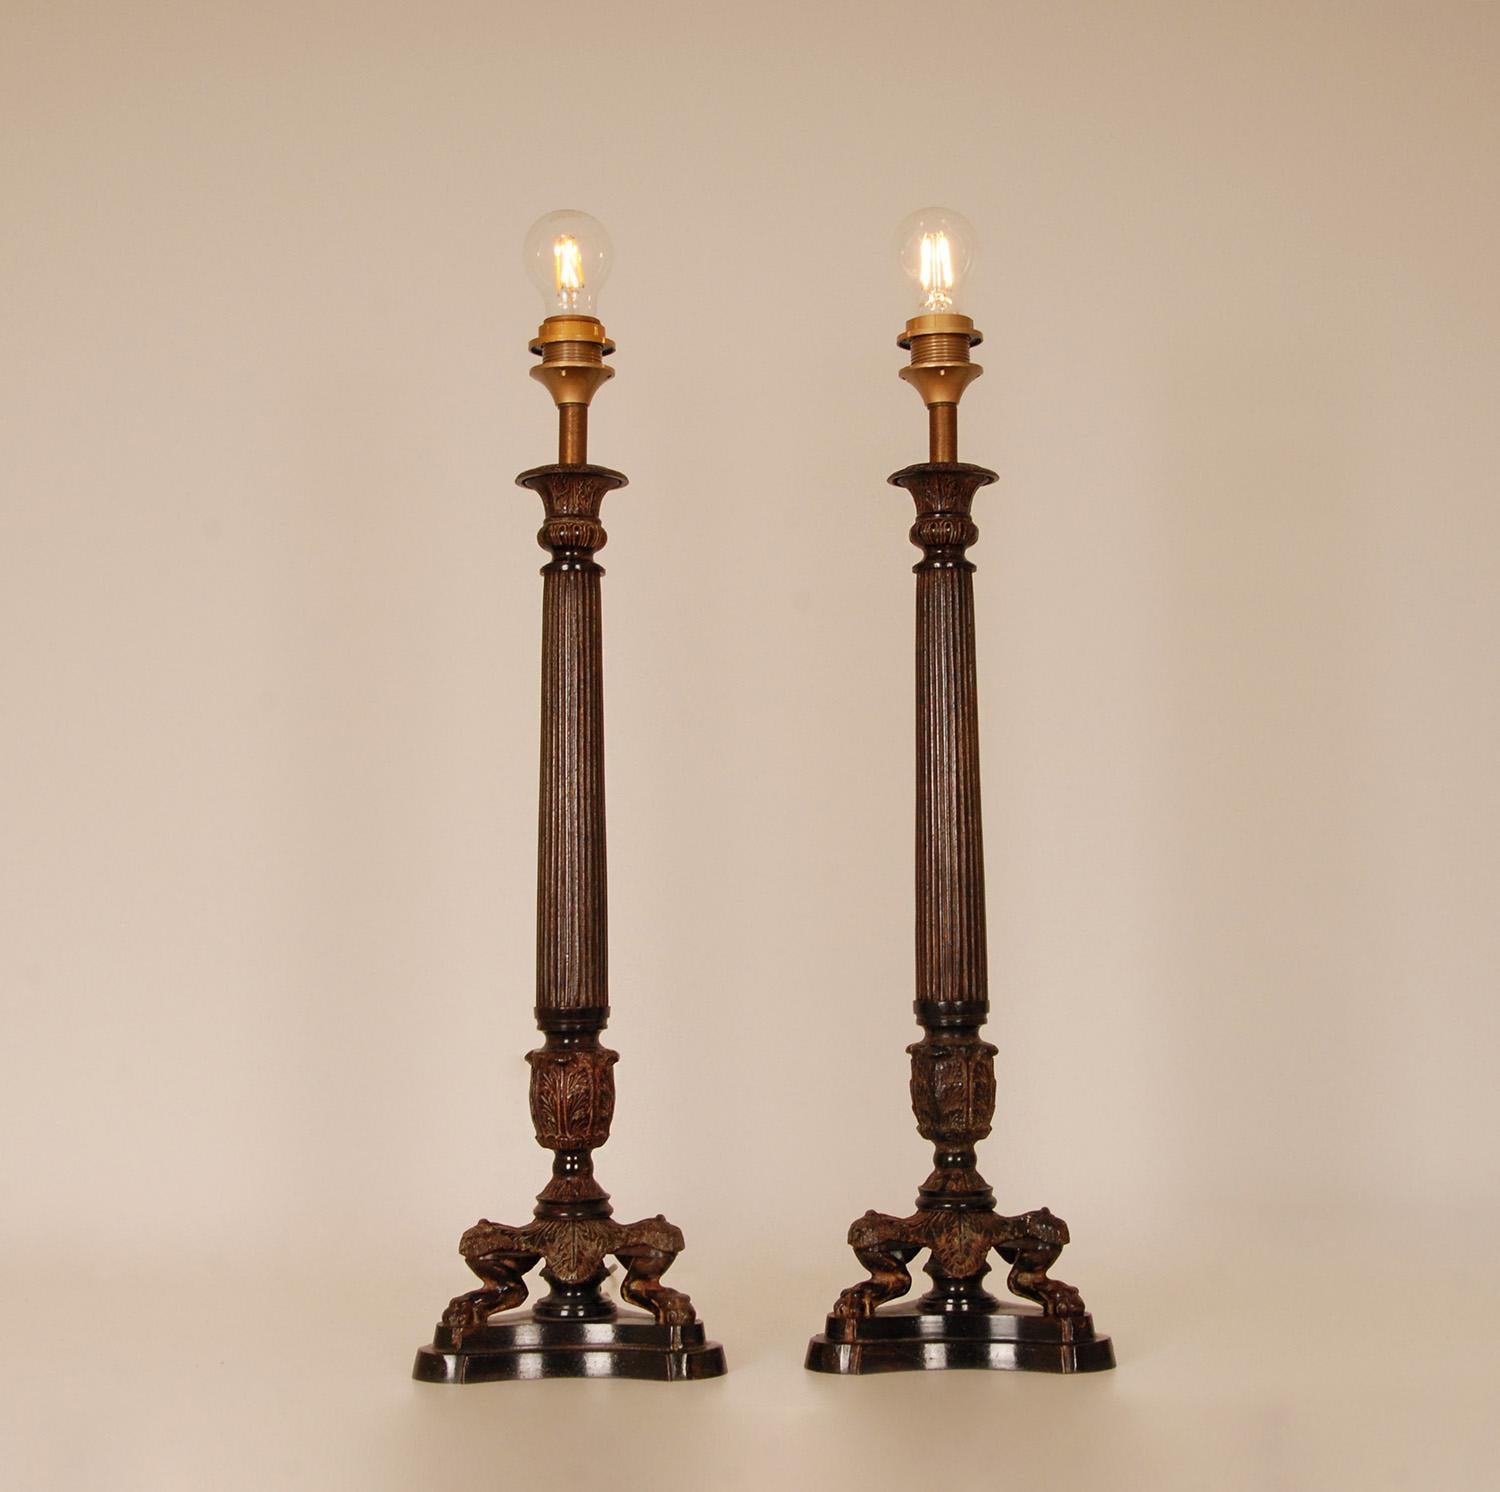 Tall French Empire Table Lamps
Style, Vintage, Empire, Napoleonic, Traditional, Classic, Baroque, 
Design: Traditional Napoleonic Column lamps in the manner of Chapman, Henredon,
Frederick Cooper, Stiffel, Maison Bagues, Maison Charles,